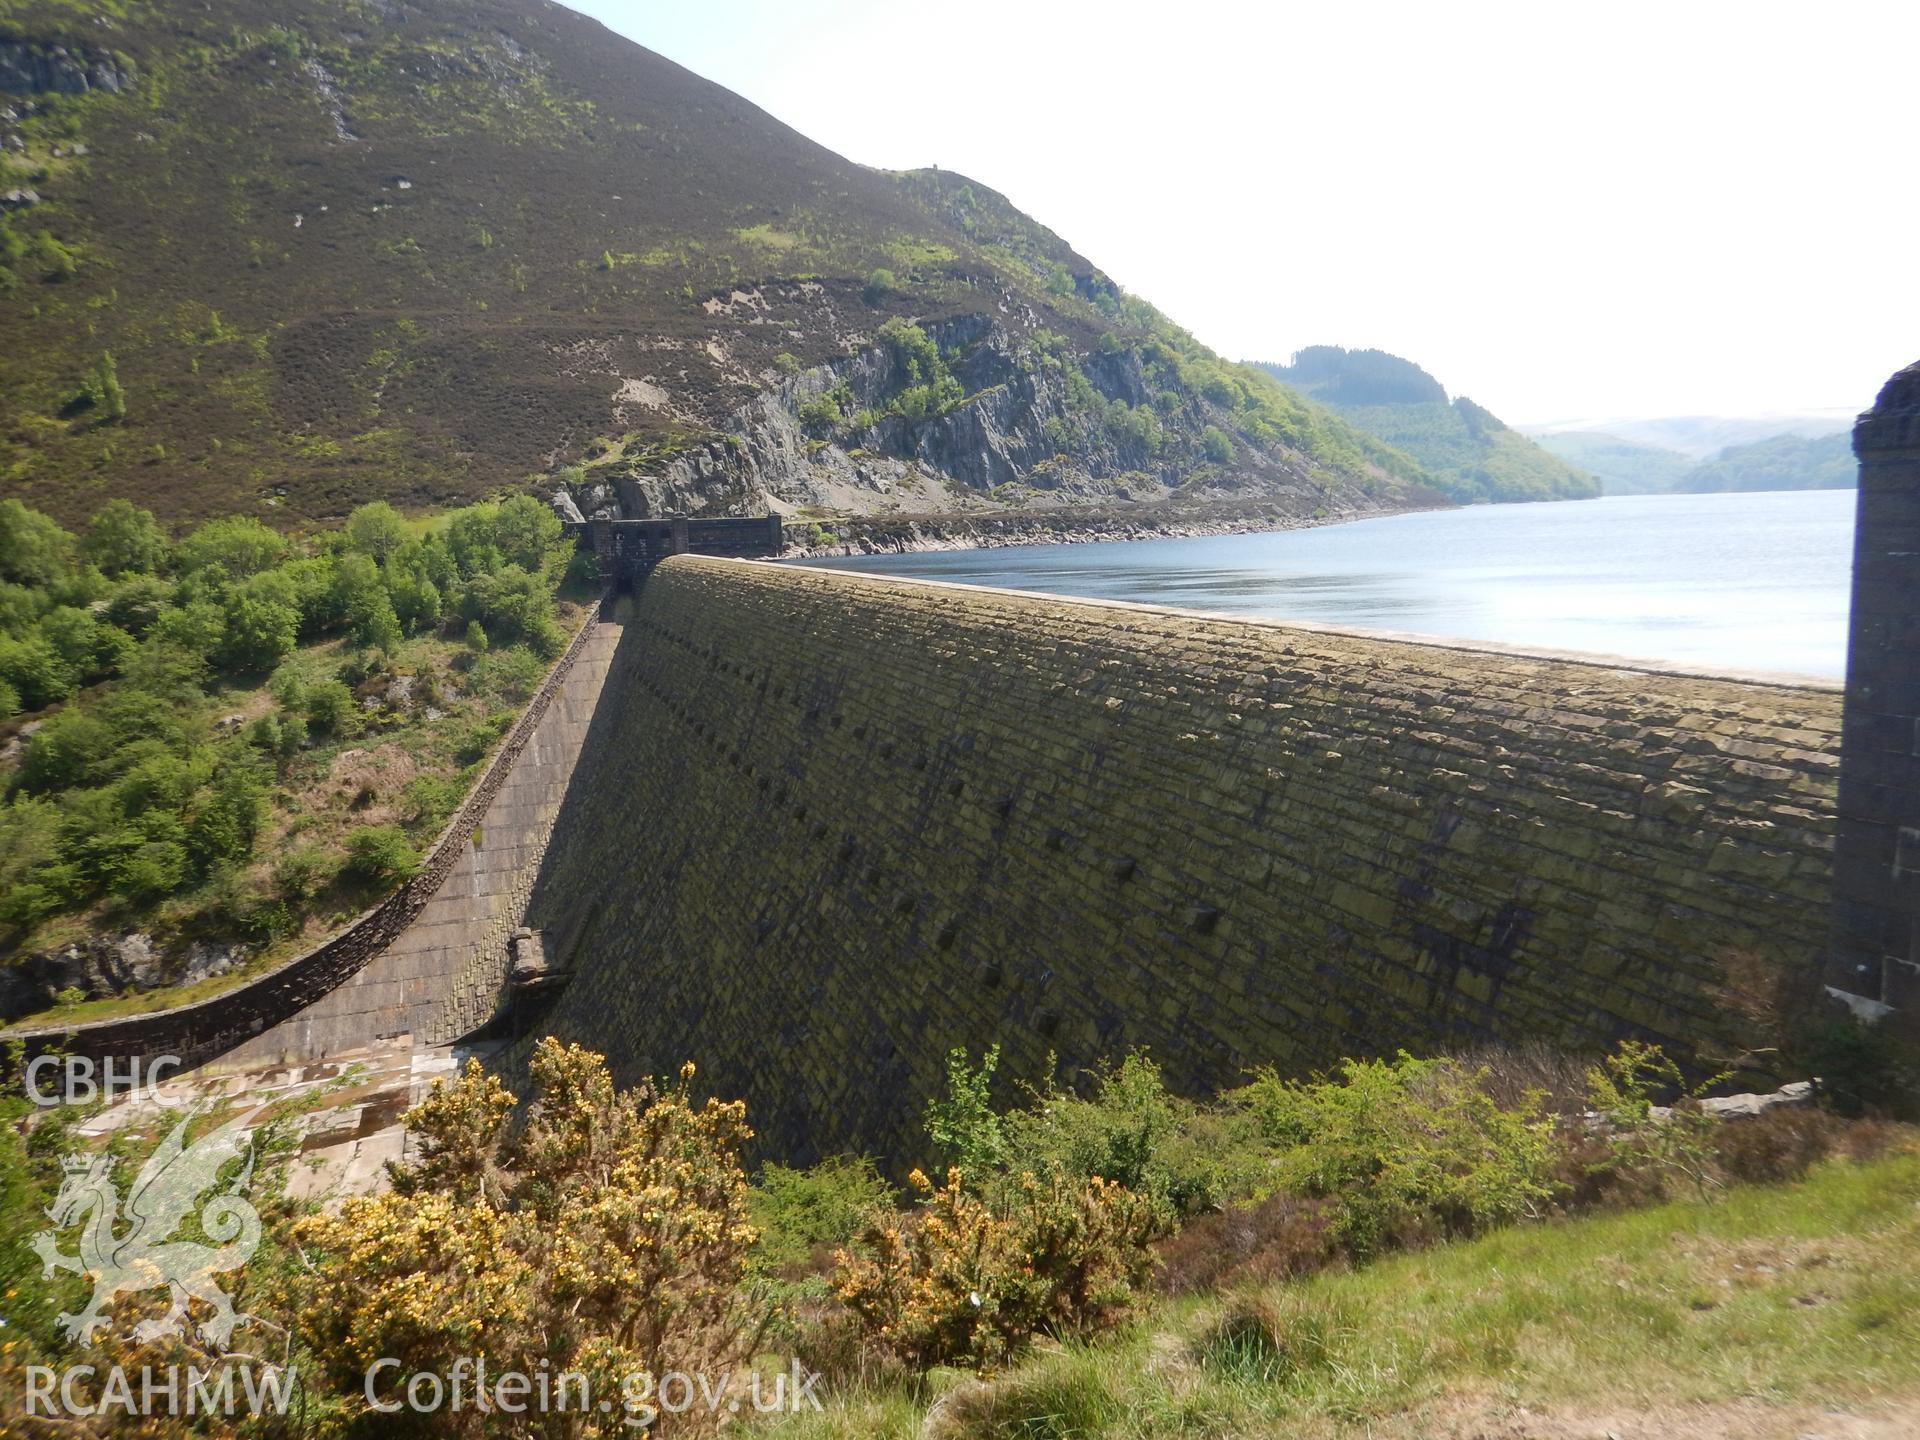 Caban Coch reservoir dam, looking south. Photographed as part of Archaeological Desk Based Assessment of Afon Claerwen, Elan Valley, Rhayader, Powys. Assessment conducted by Archaeology Wales in 2018. Report no. 1681. Project no. 2573.